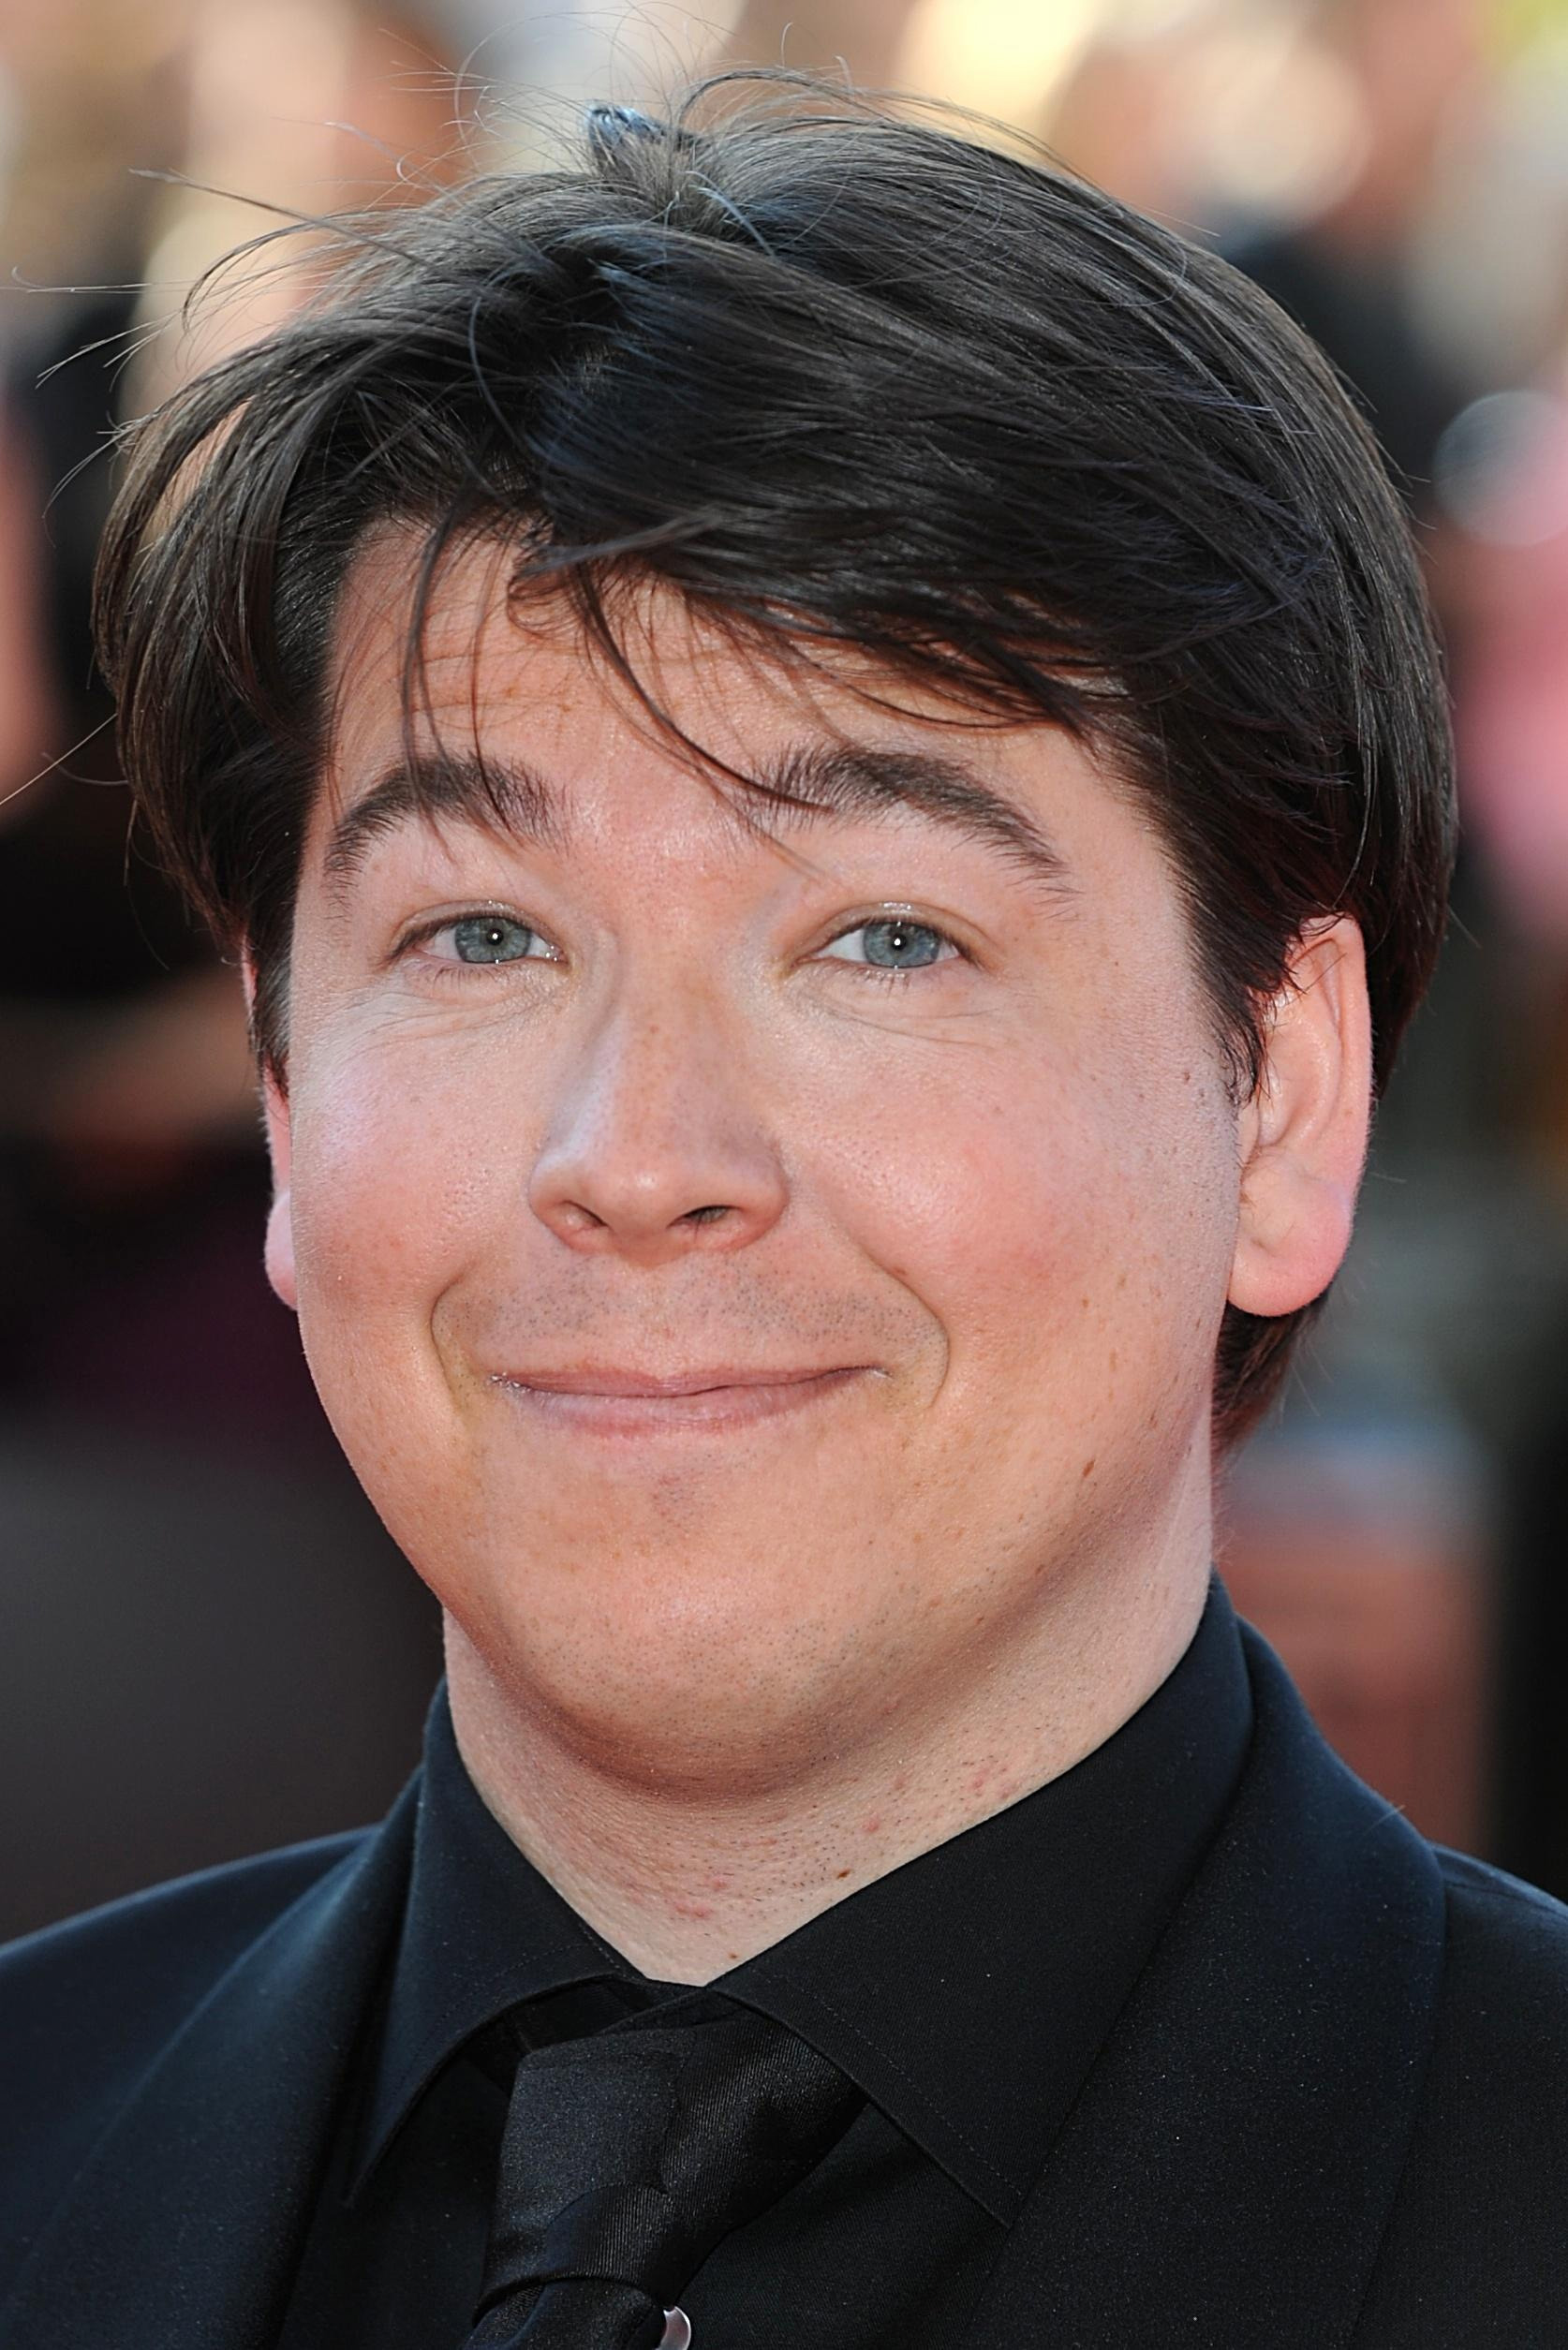 MICHAEL MCINTYRE walks off stage while security speak to woman in.